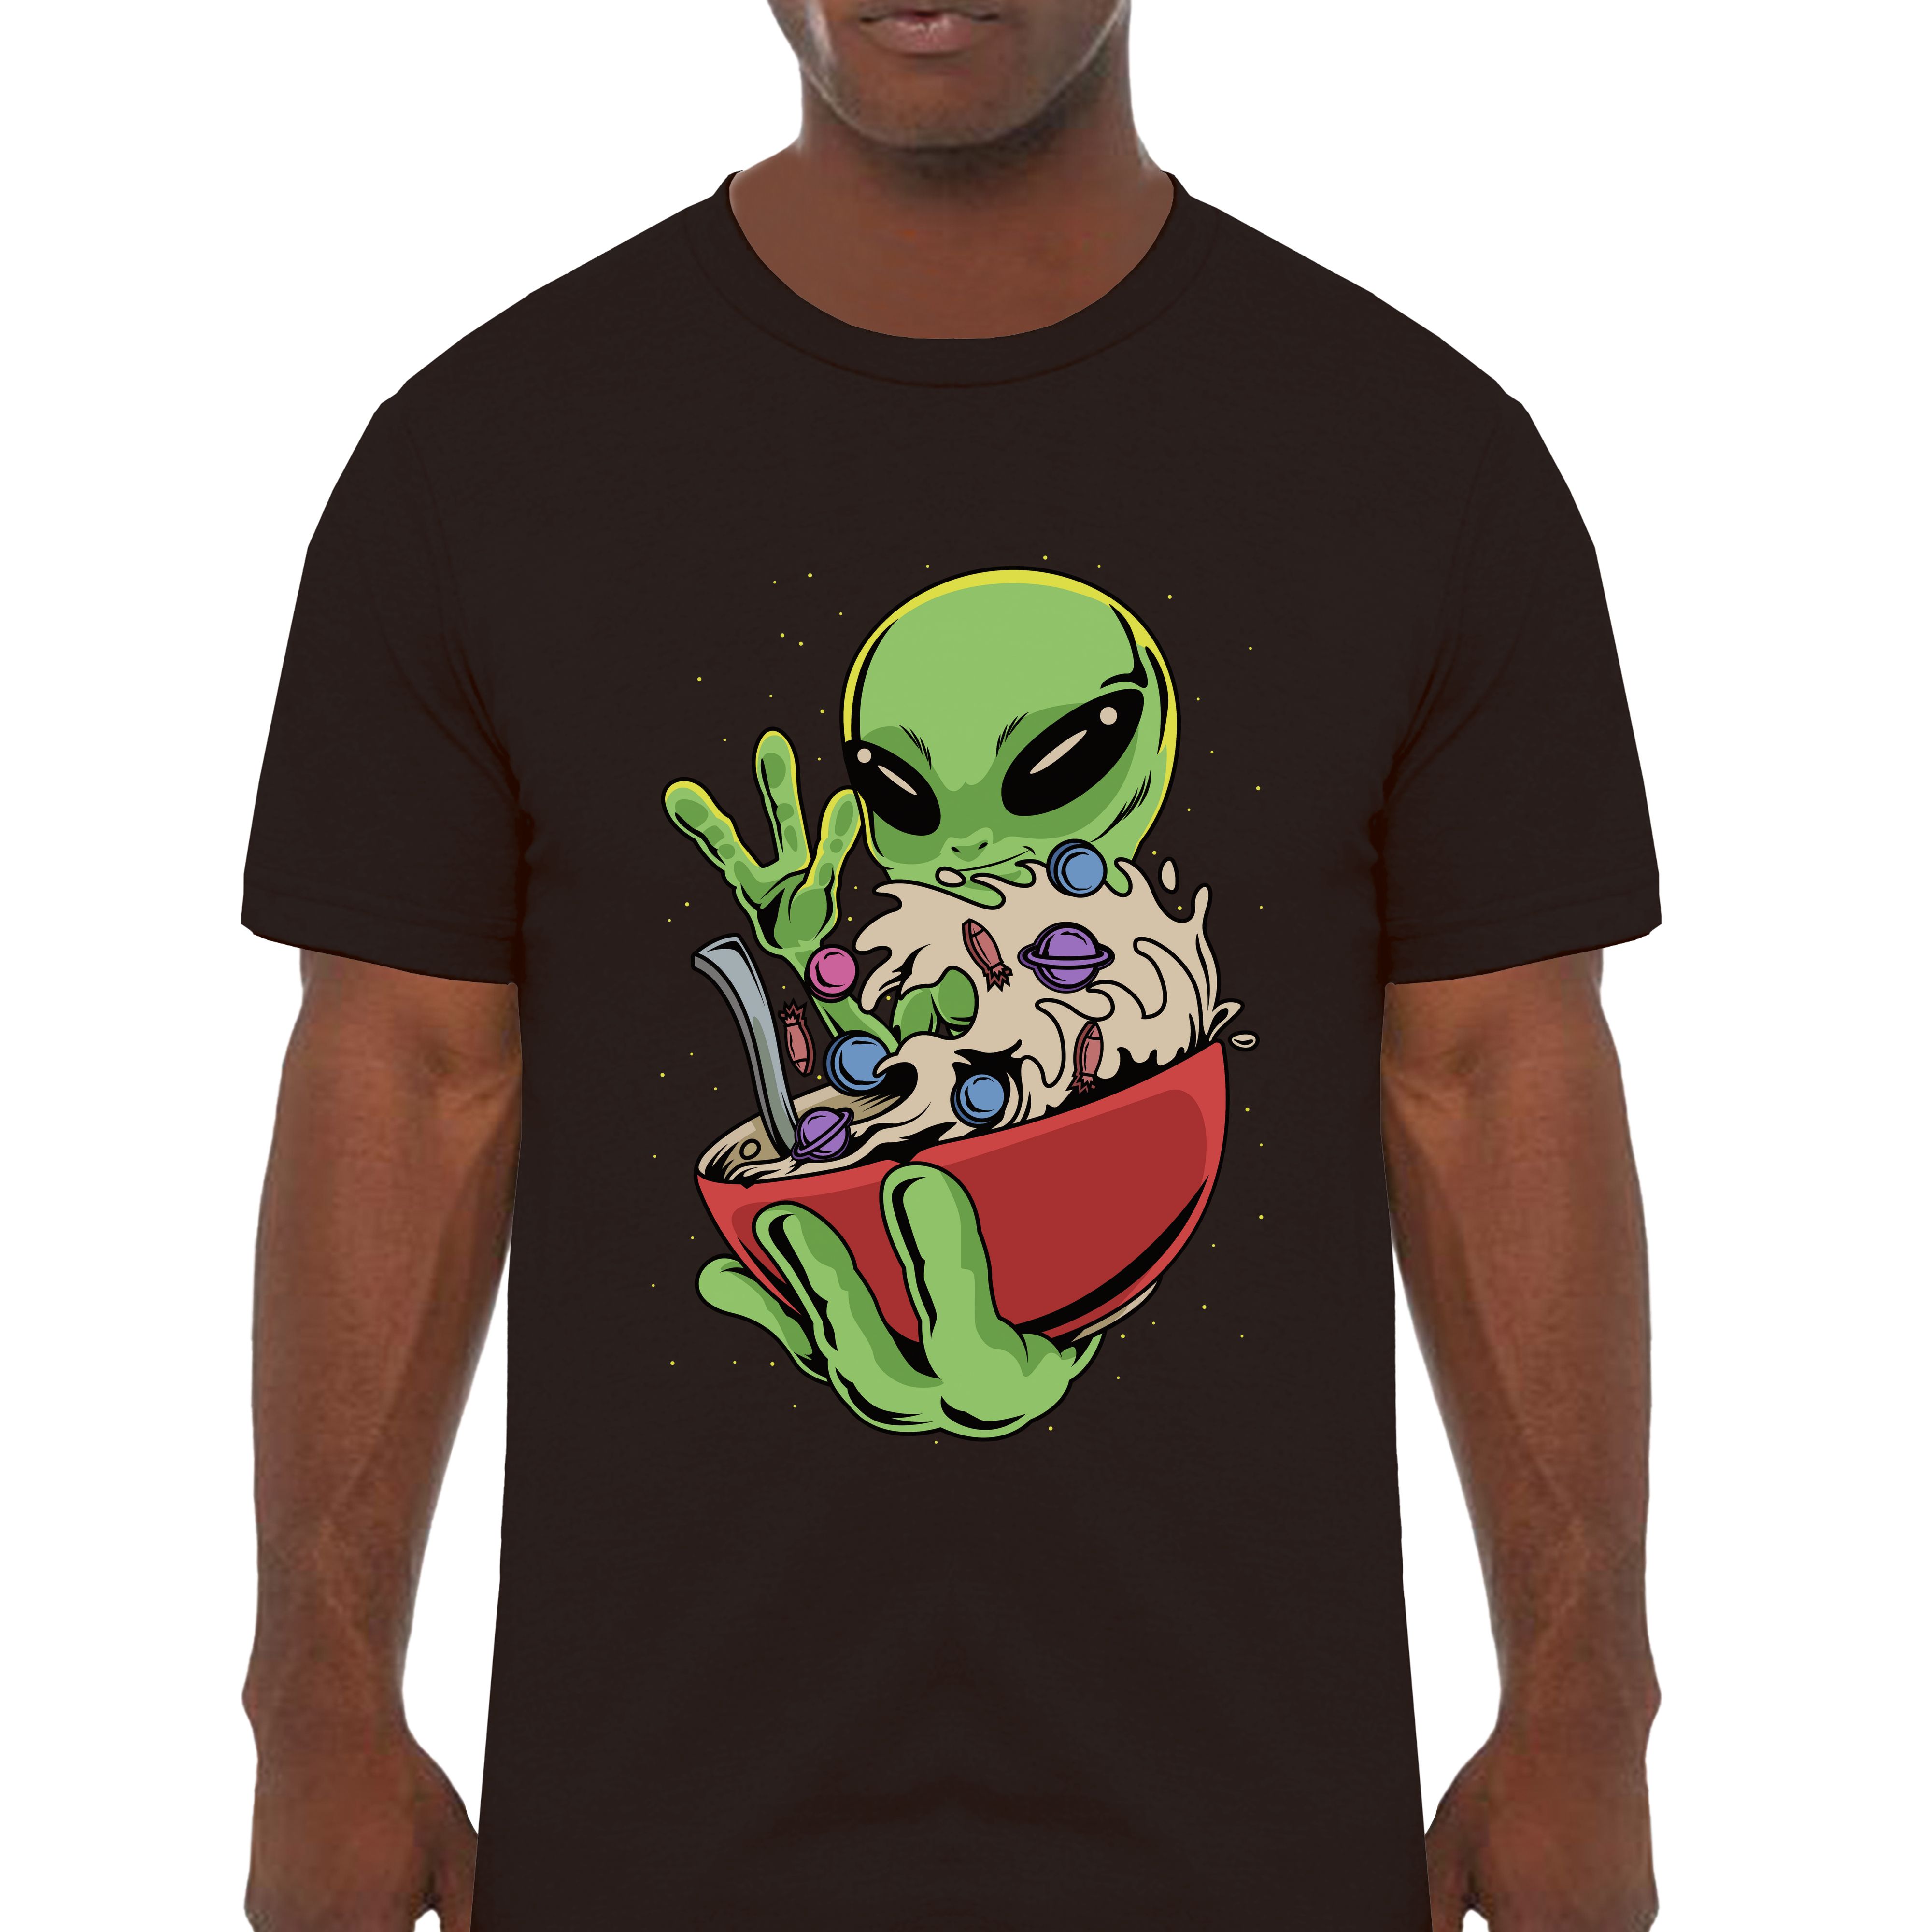 Space Os Cereal Classic Graphic T-Shirt - Cuztom Threadz